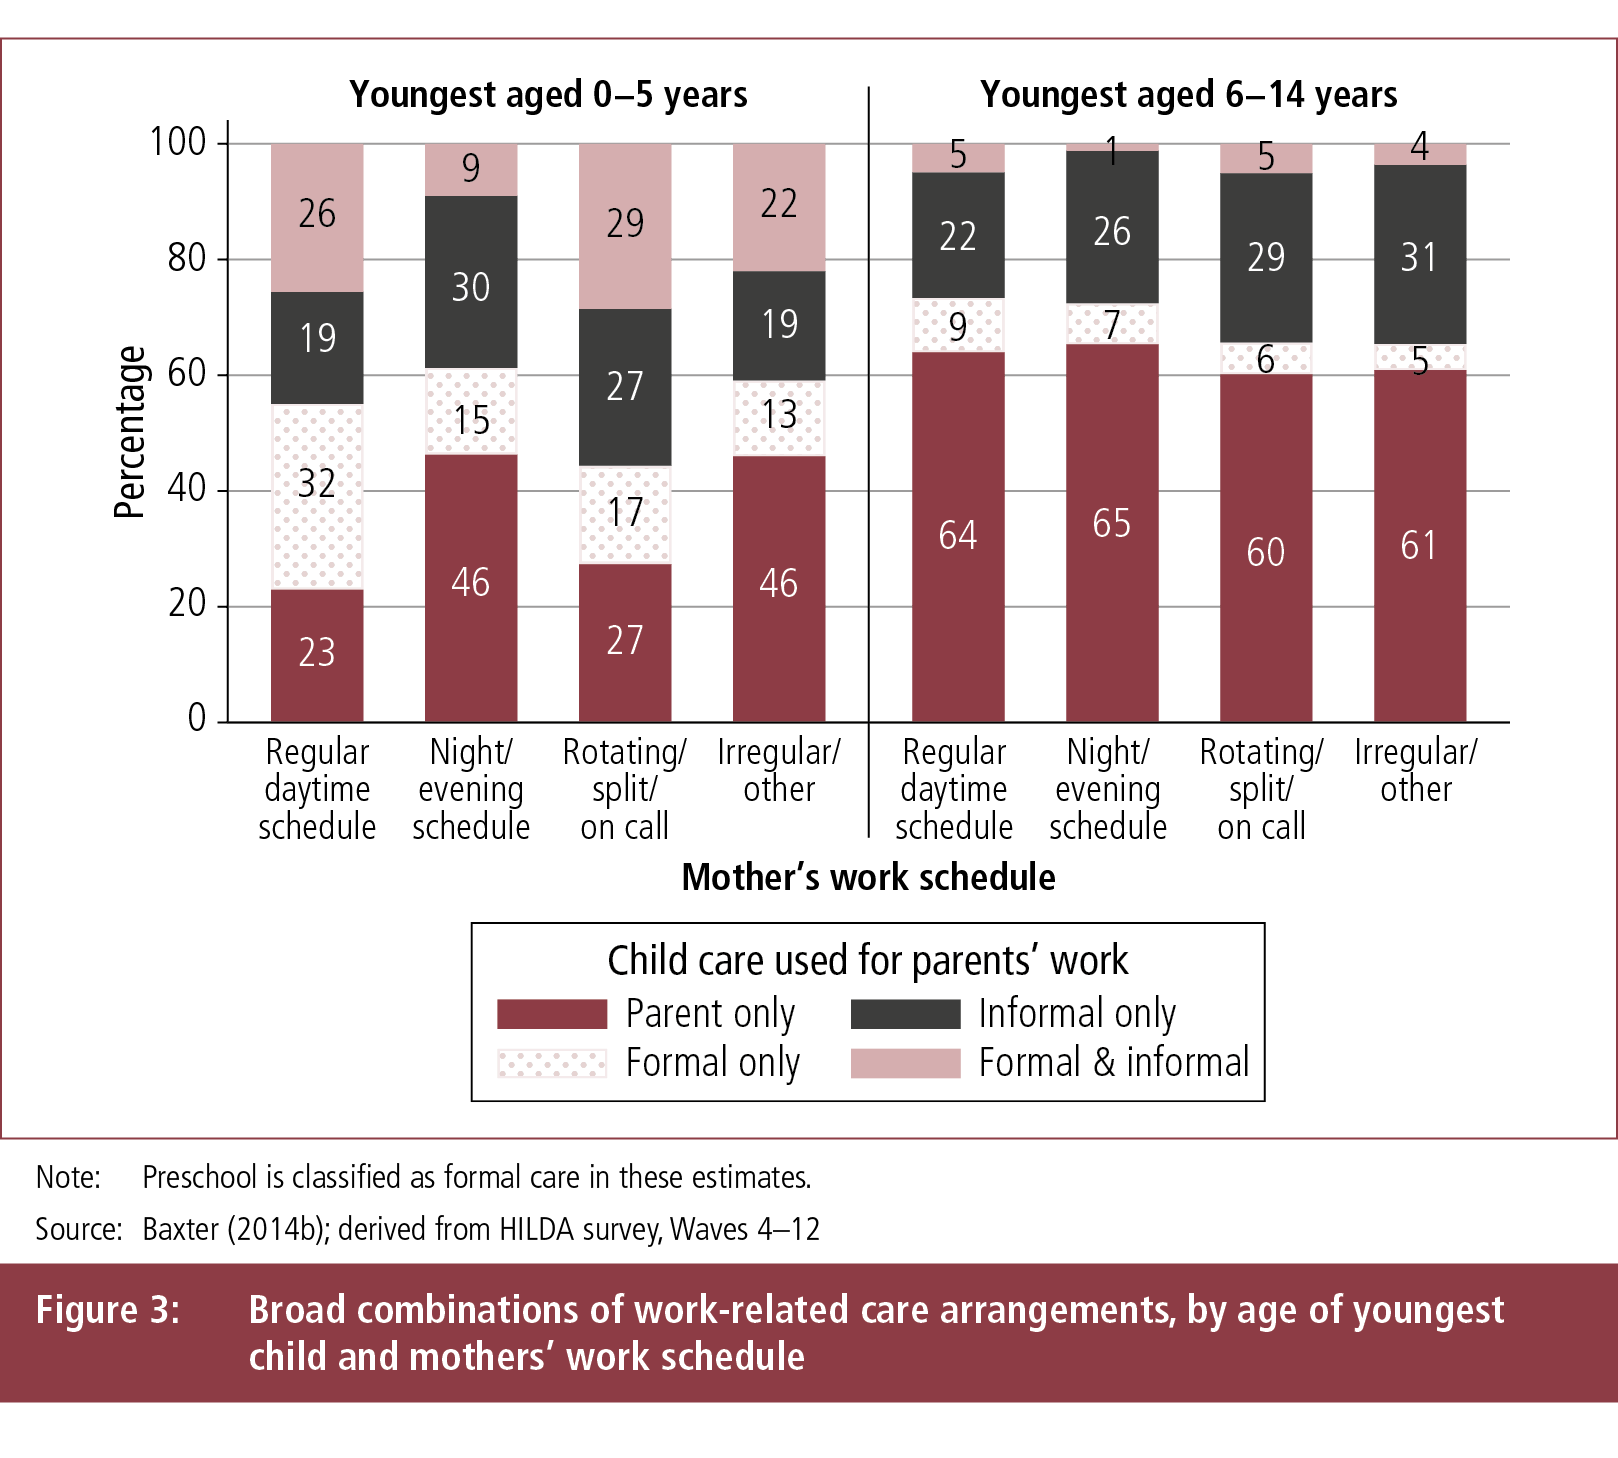 Figure 3: Broad combinations of work-related care arrangements, by age of youngest child and mothers' work schedule. Figure described in text.